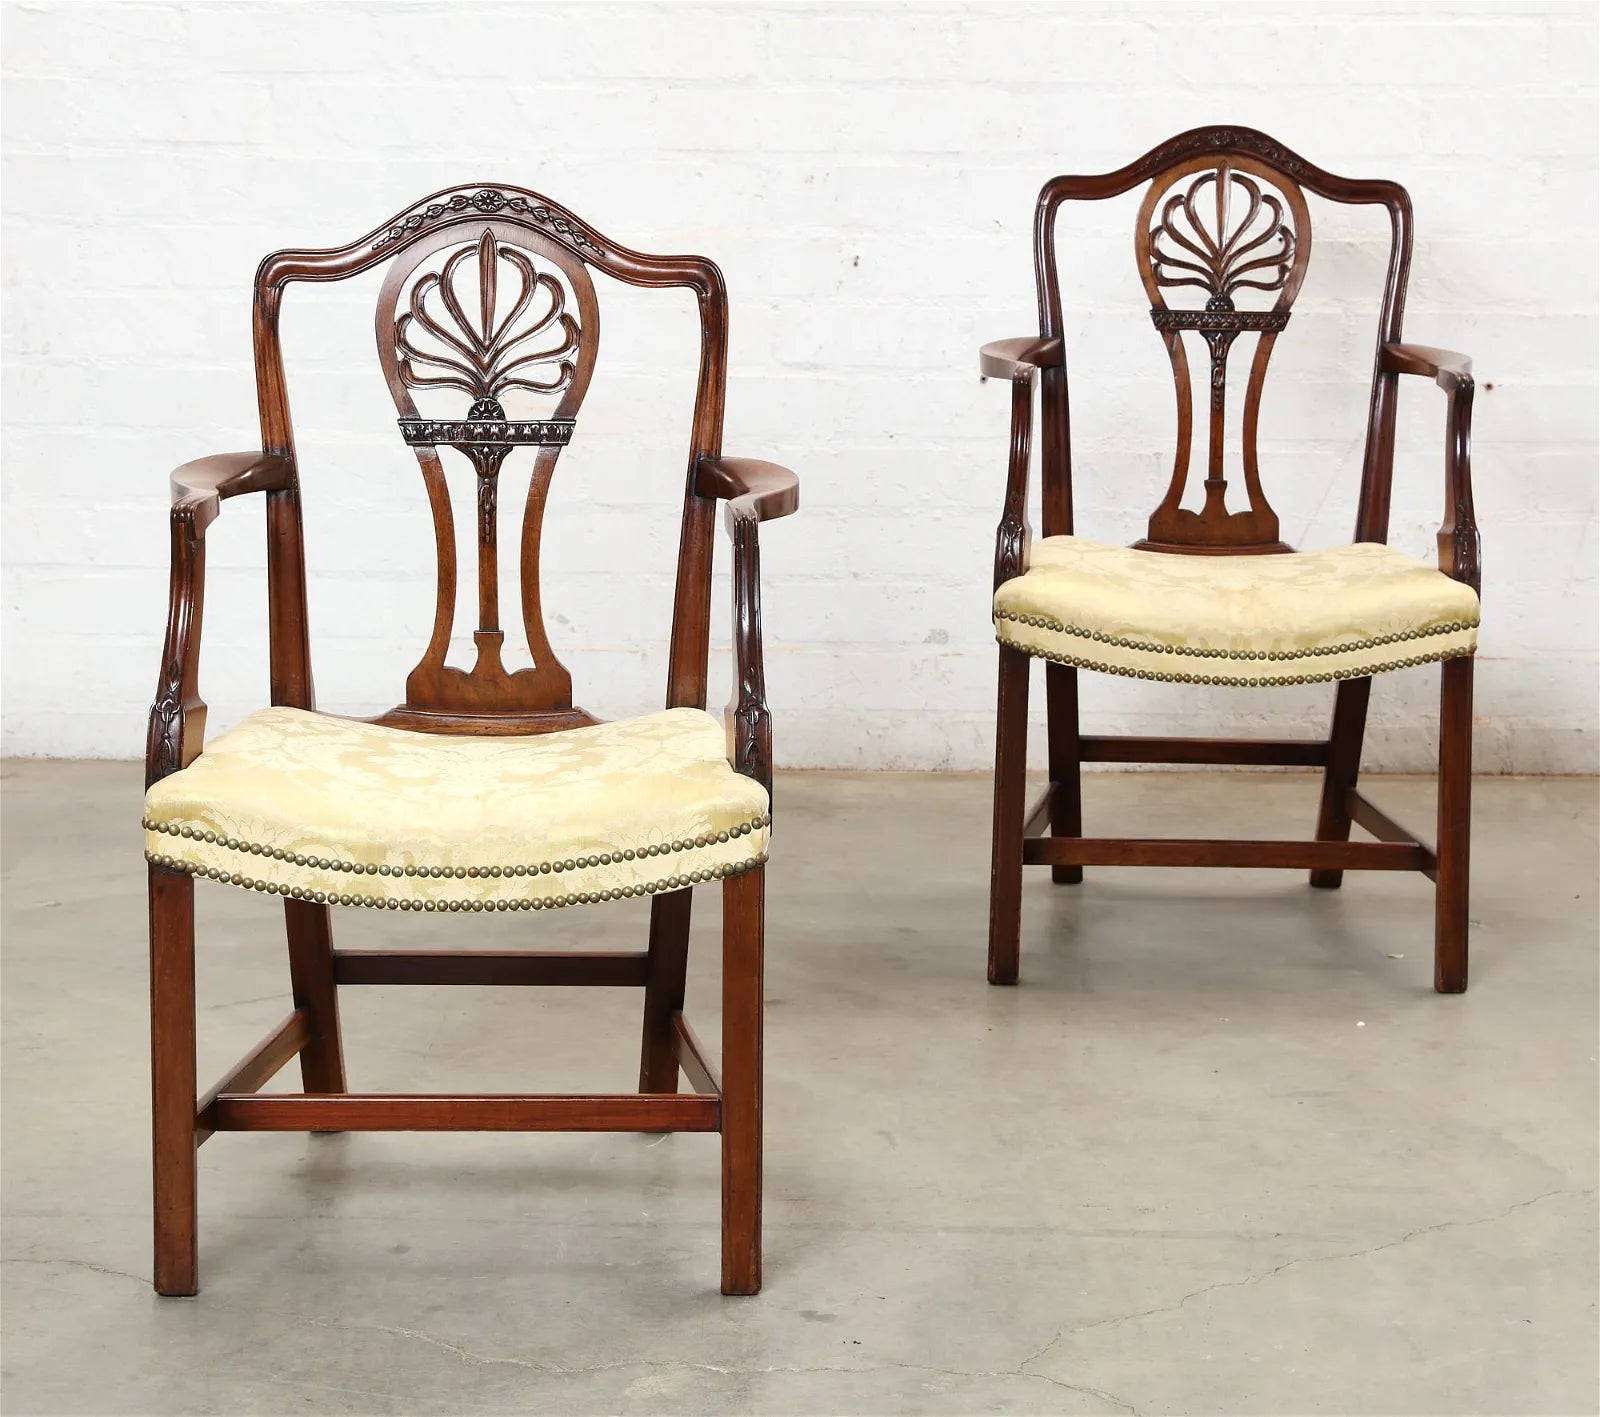 AF2-406: ANTIQUE PAIR OF LATE 18TH CENTURY ENGLISH GEORGE III CARVED MAHOGANY ARMCHAIRS